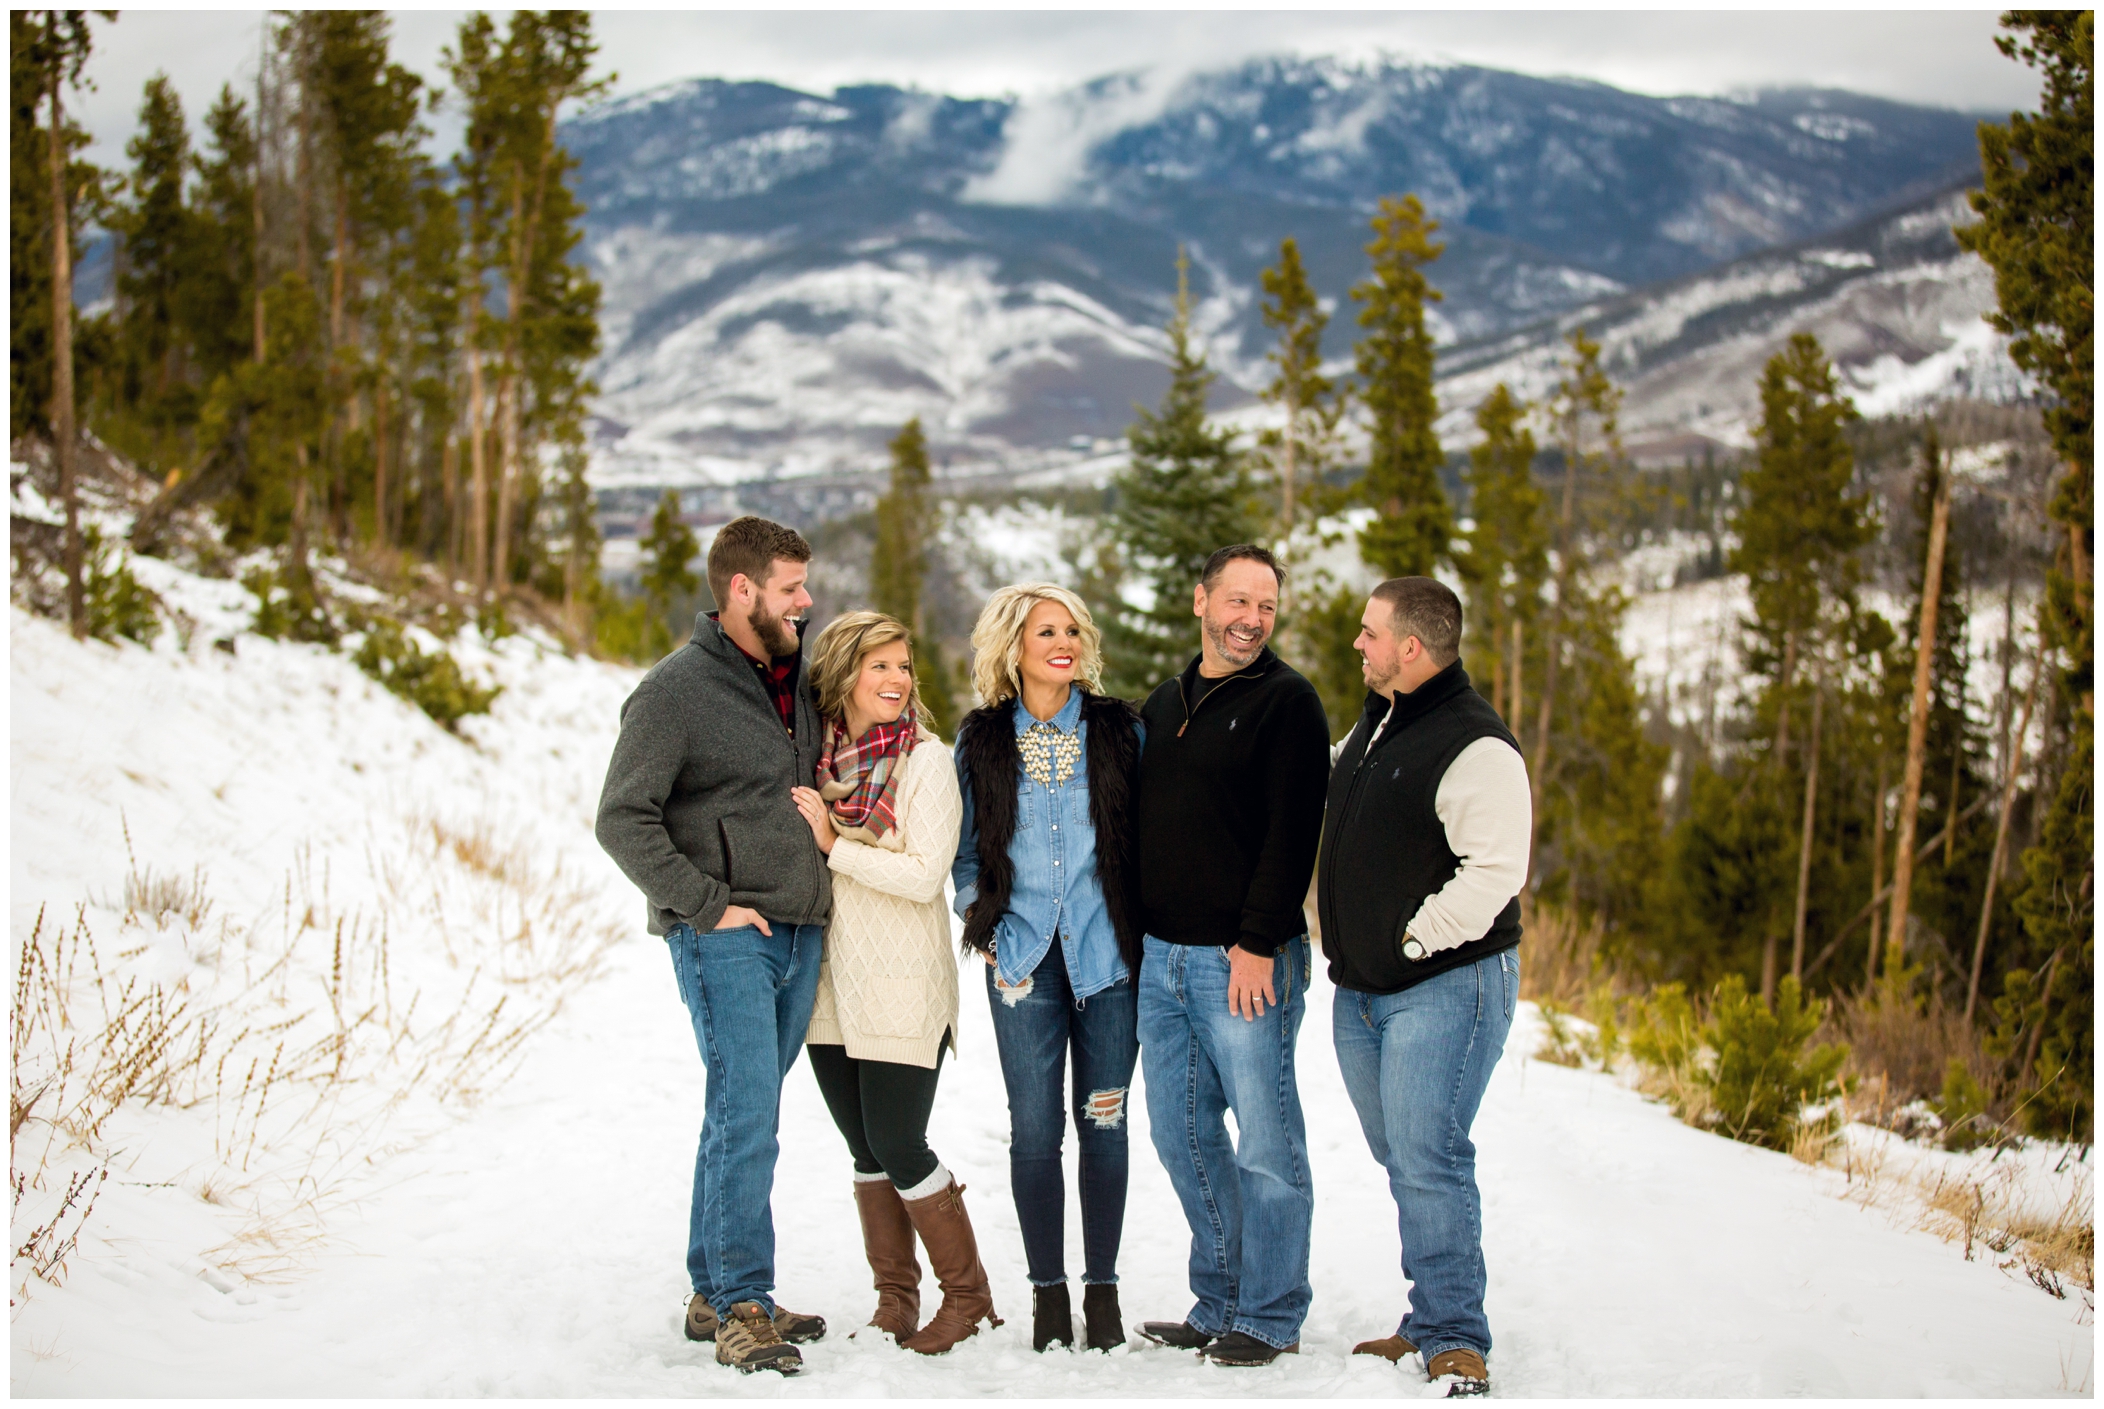 Snowy Sapphire Point photos captured by Colorado award-winning Breckenridge family photographers Plum Pretty Photography in the mountains during winter.